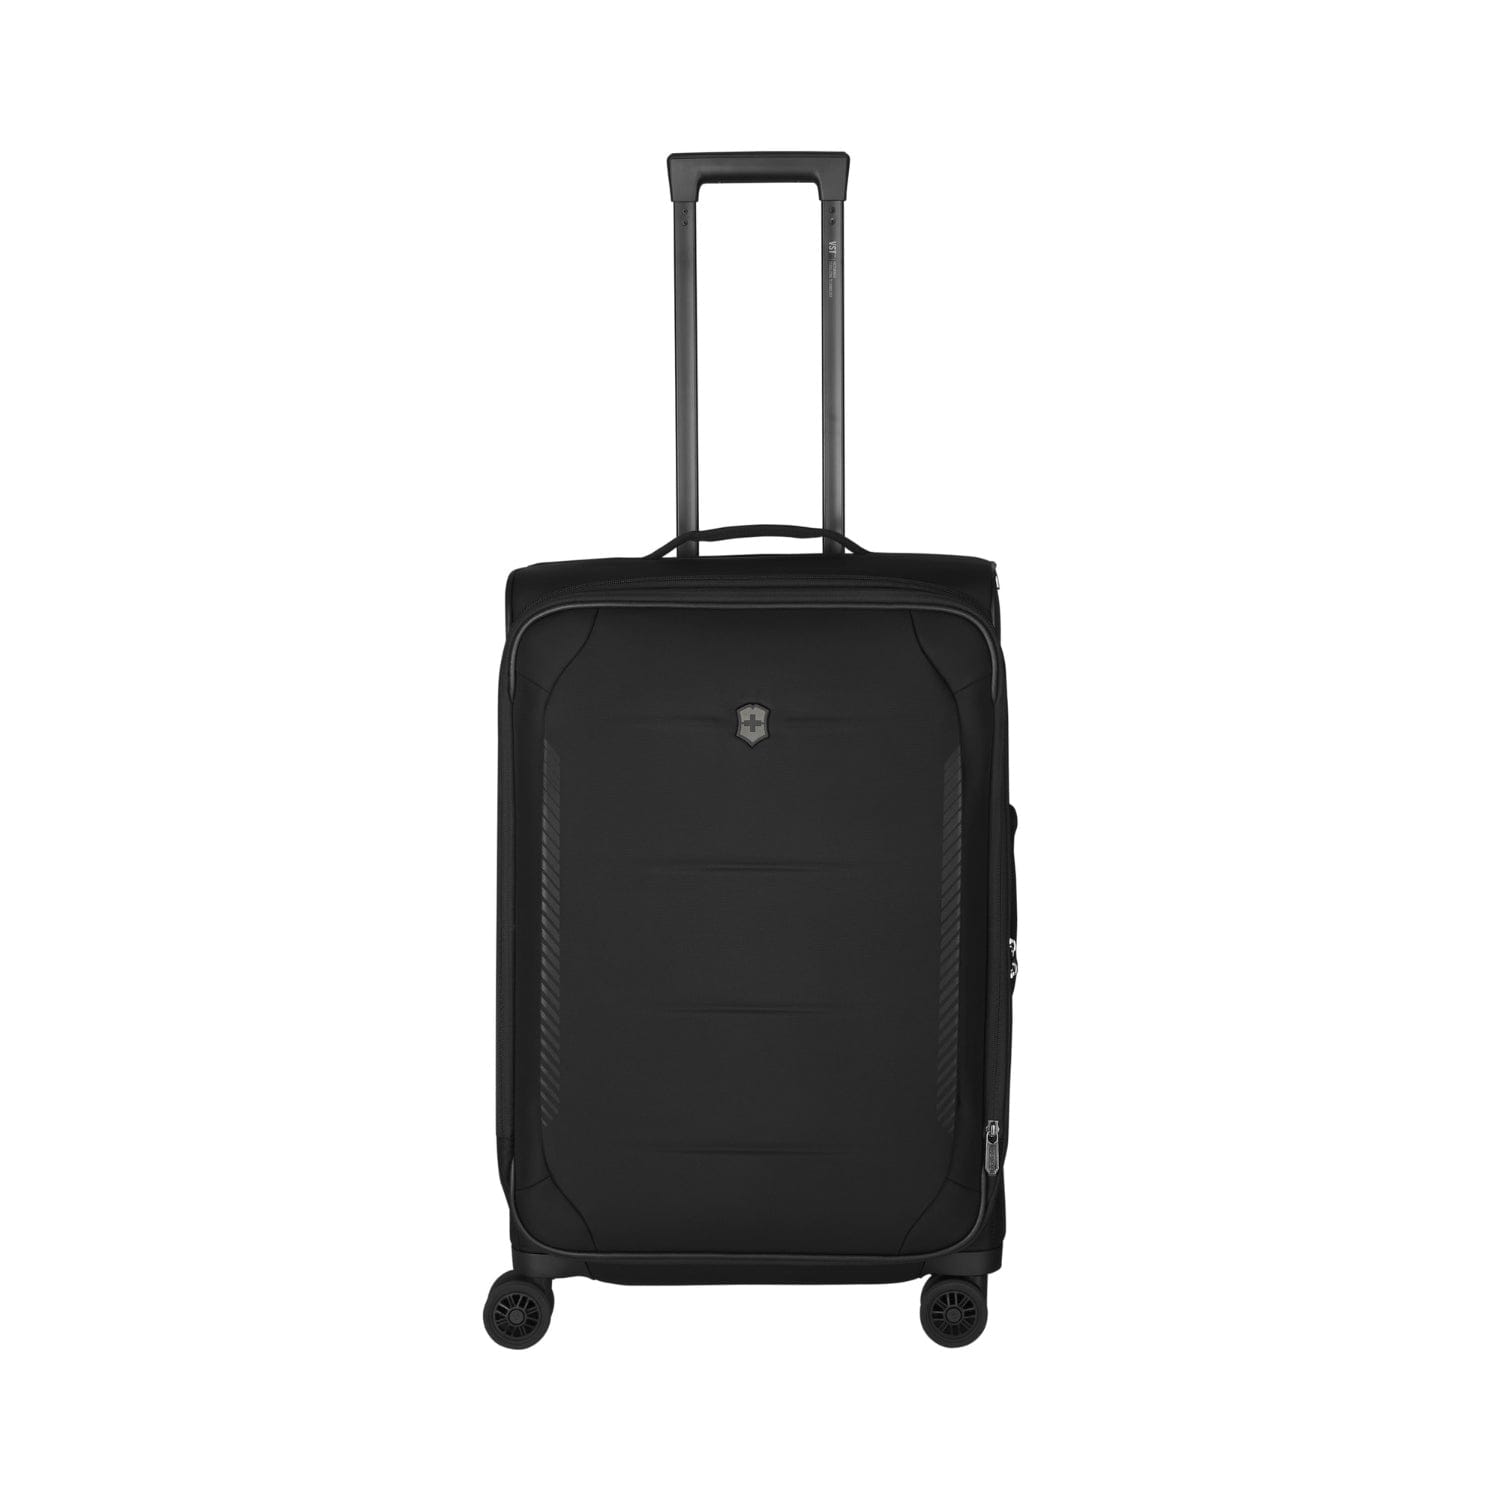 Victorinox Cross Light 68cm Hardside Expandable Check-In Luggage Trolley Black - 612420